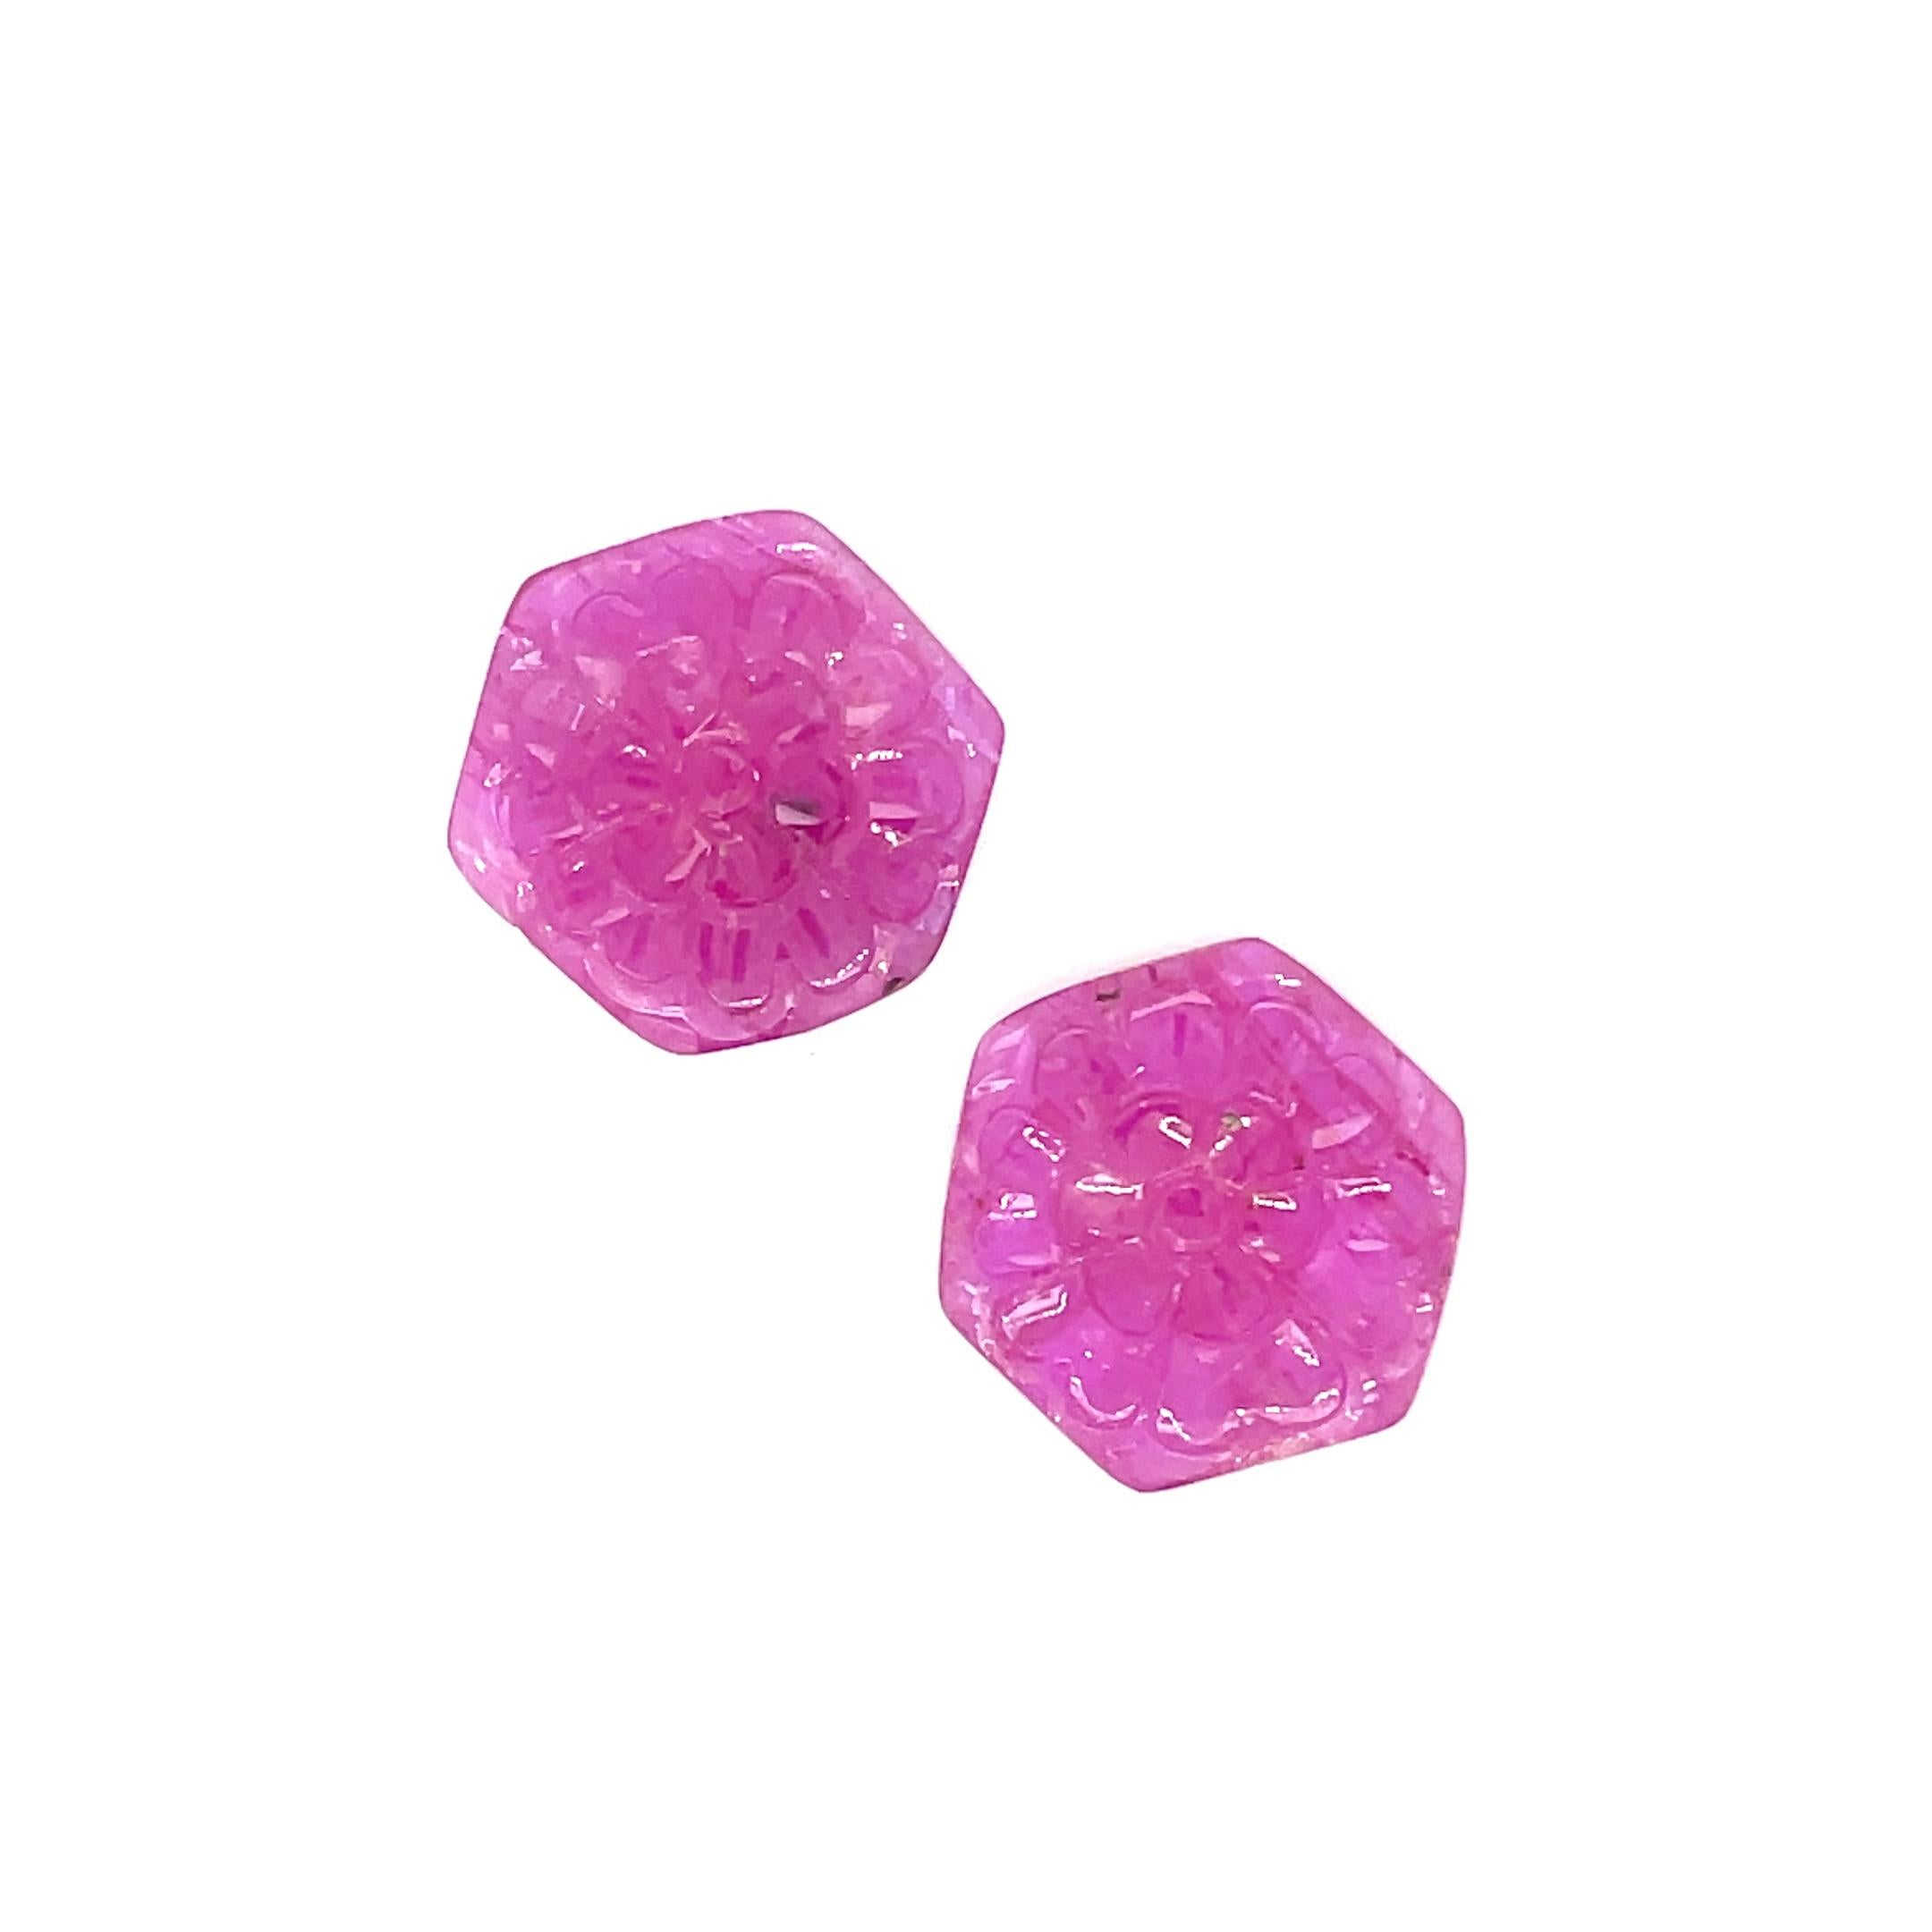 Hexagon Cut 2 Hexagon-Shaped Ruby Carvings Cts 17.47 For Sale